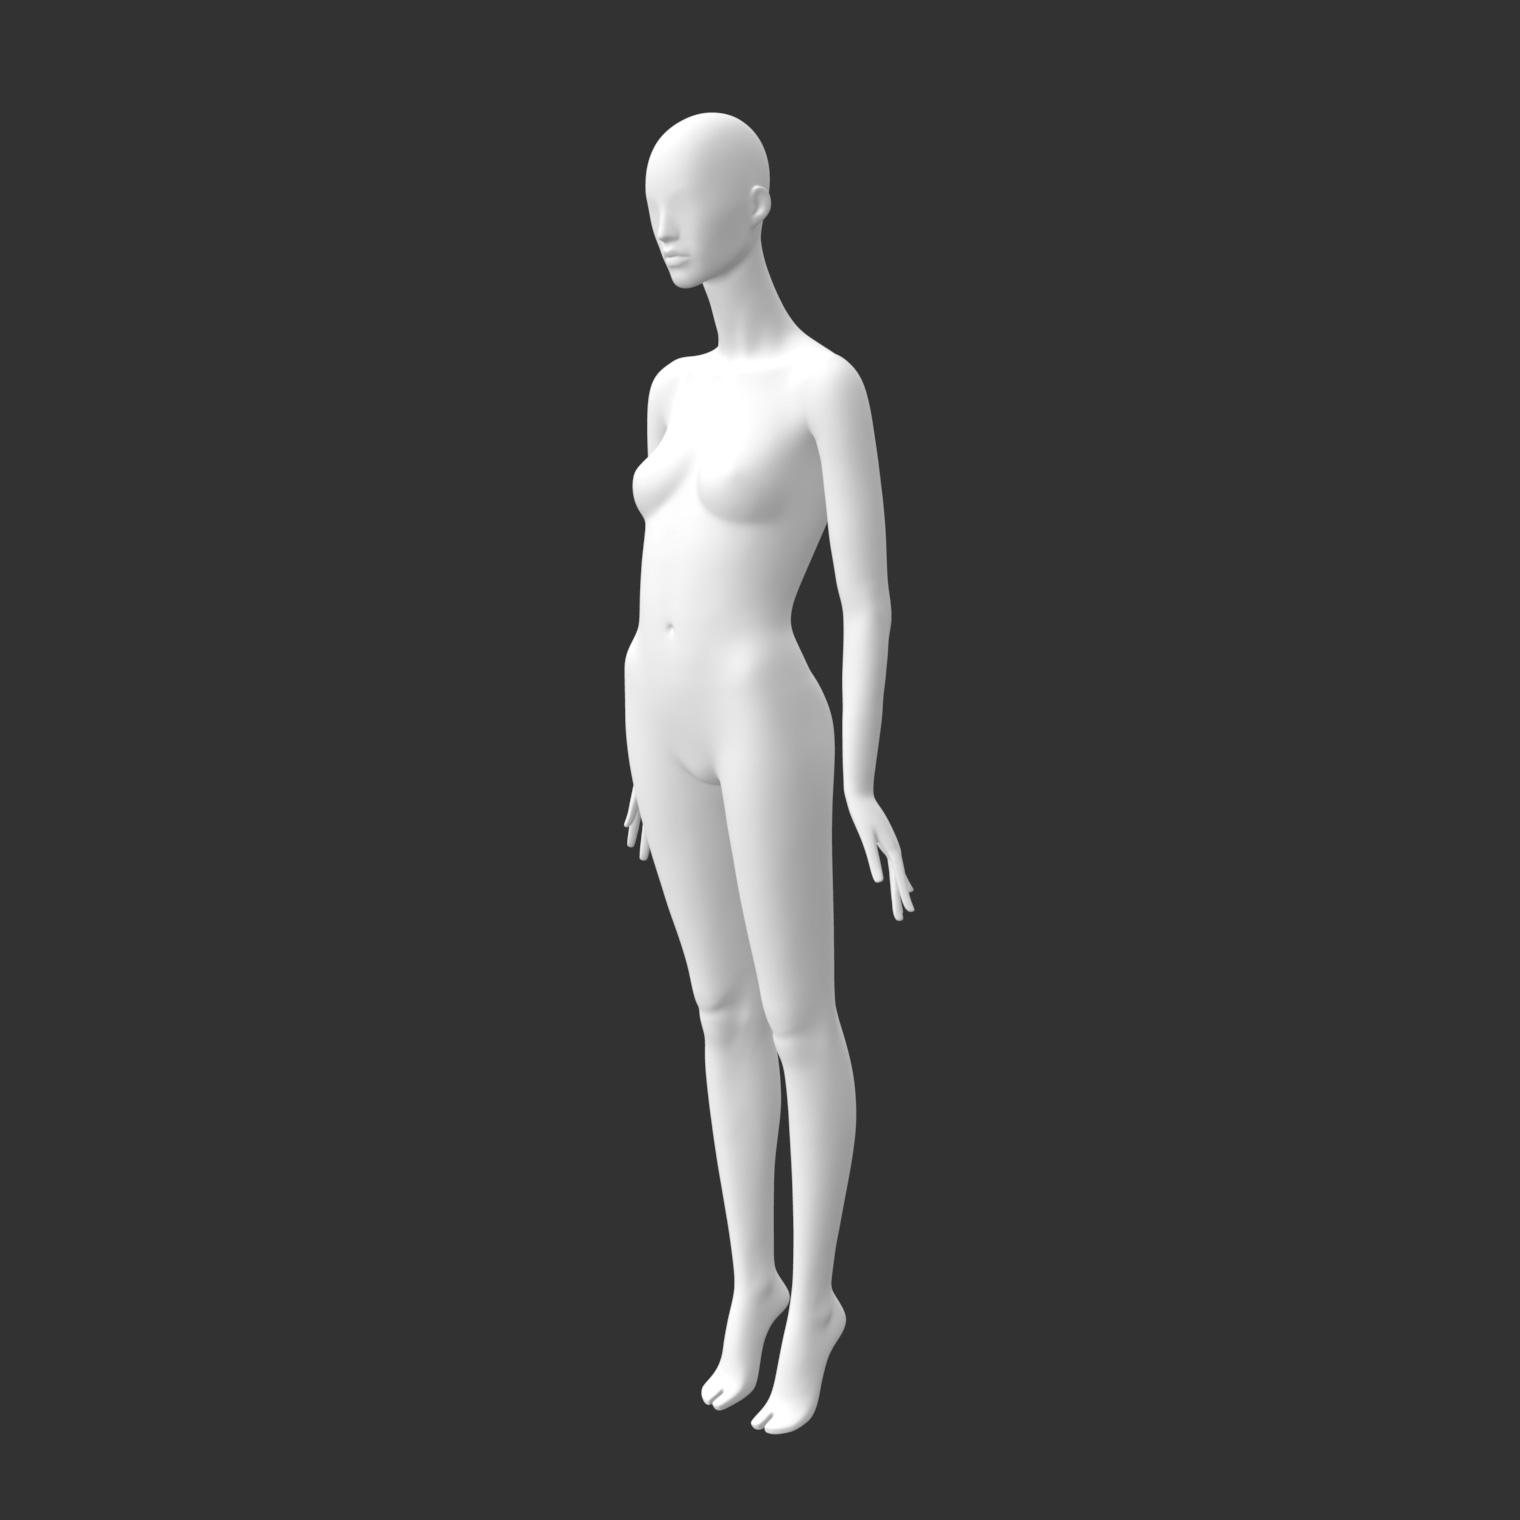 Female mannequin 3d printing model of abstract stand of high heeled shoes tiptoe